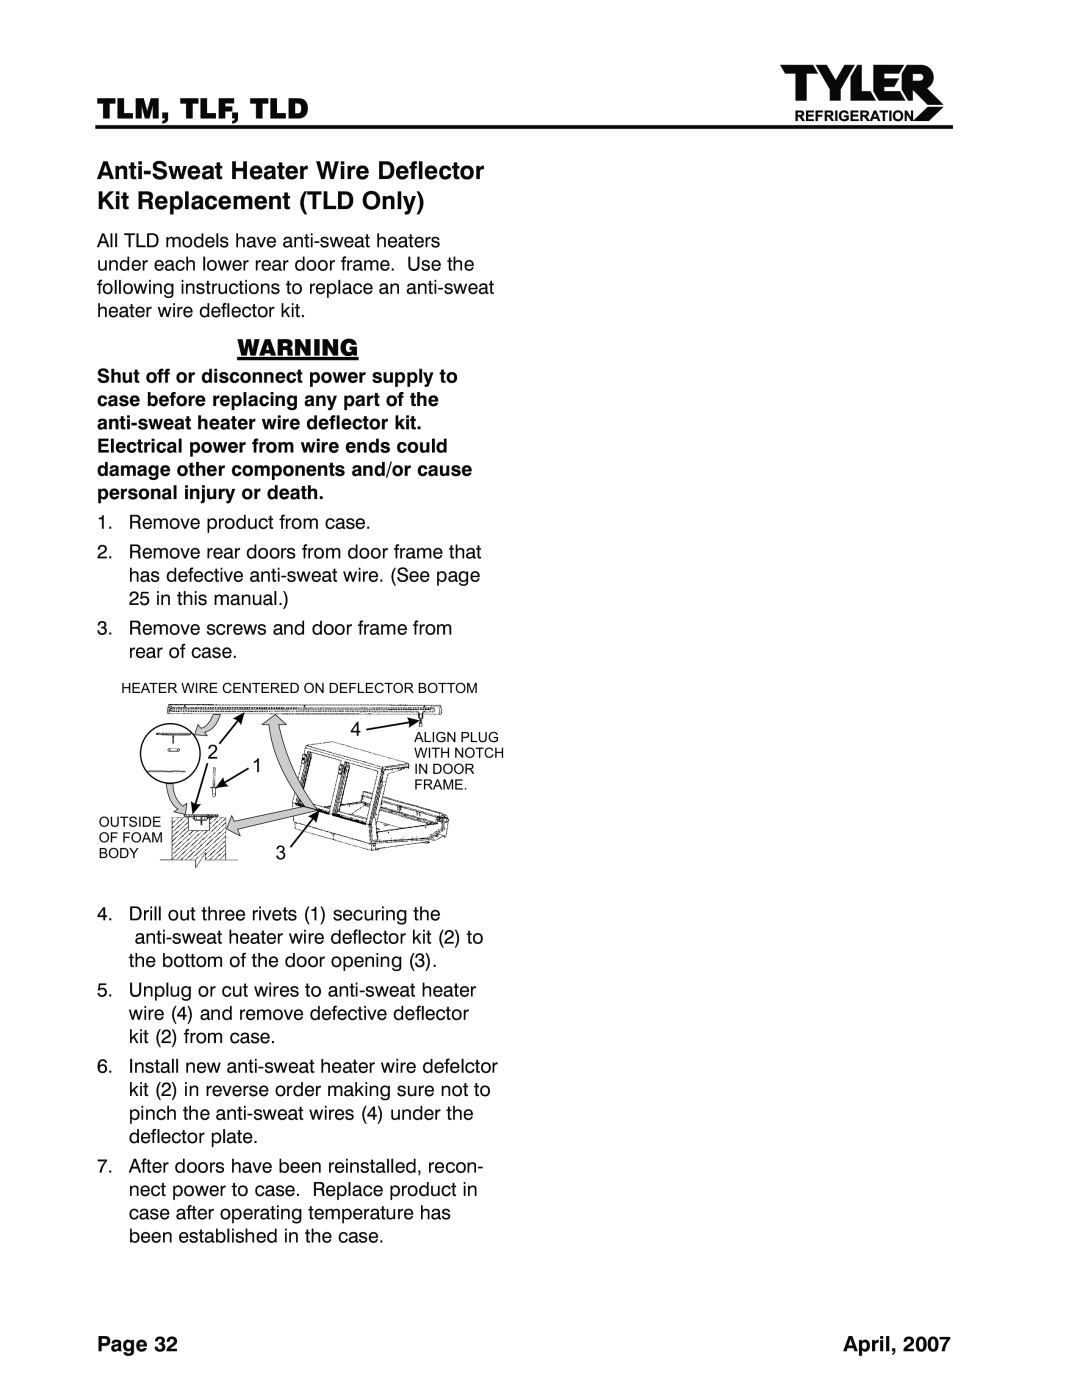 Tyler Refrigeration TLM, TLF, TLD service manual Tlm, Tlf, Tld, Remove product from case 